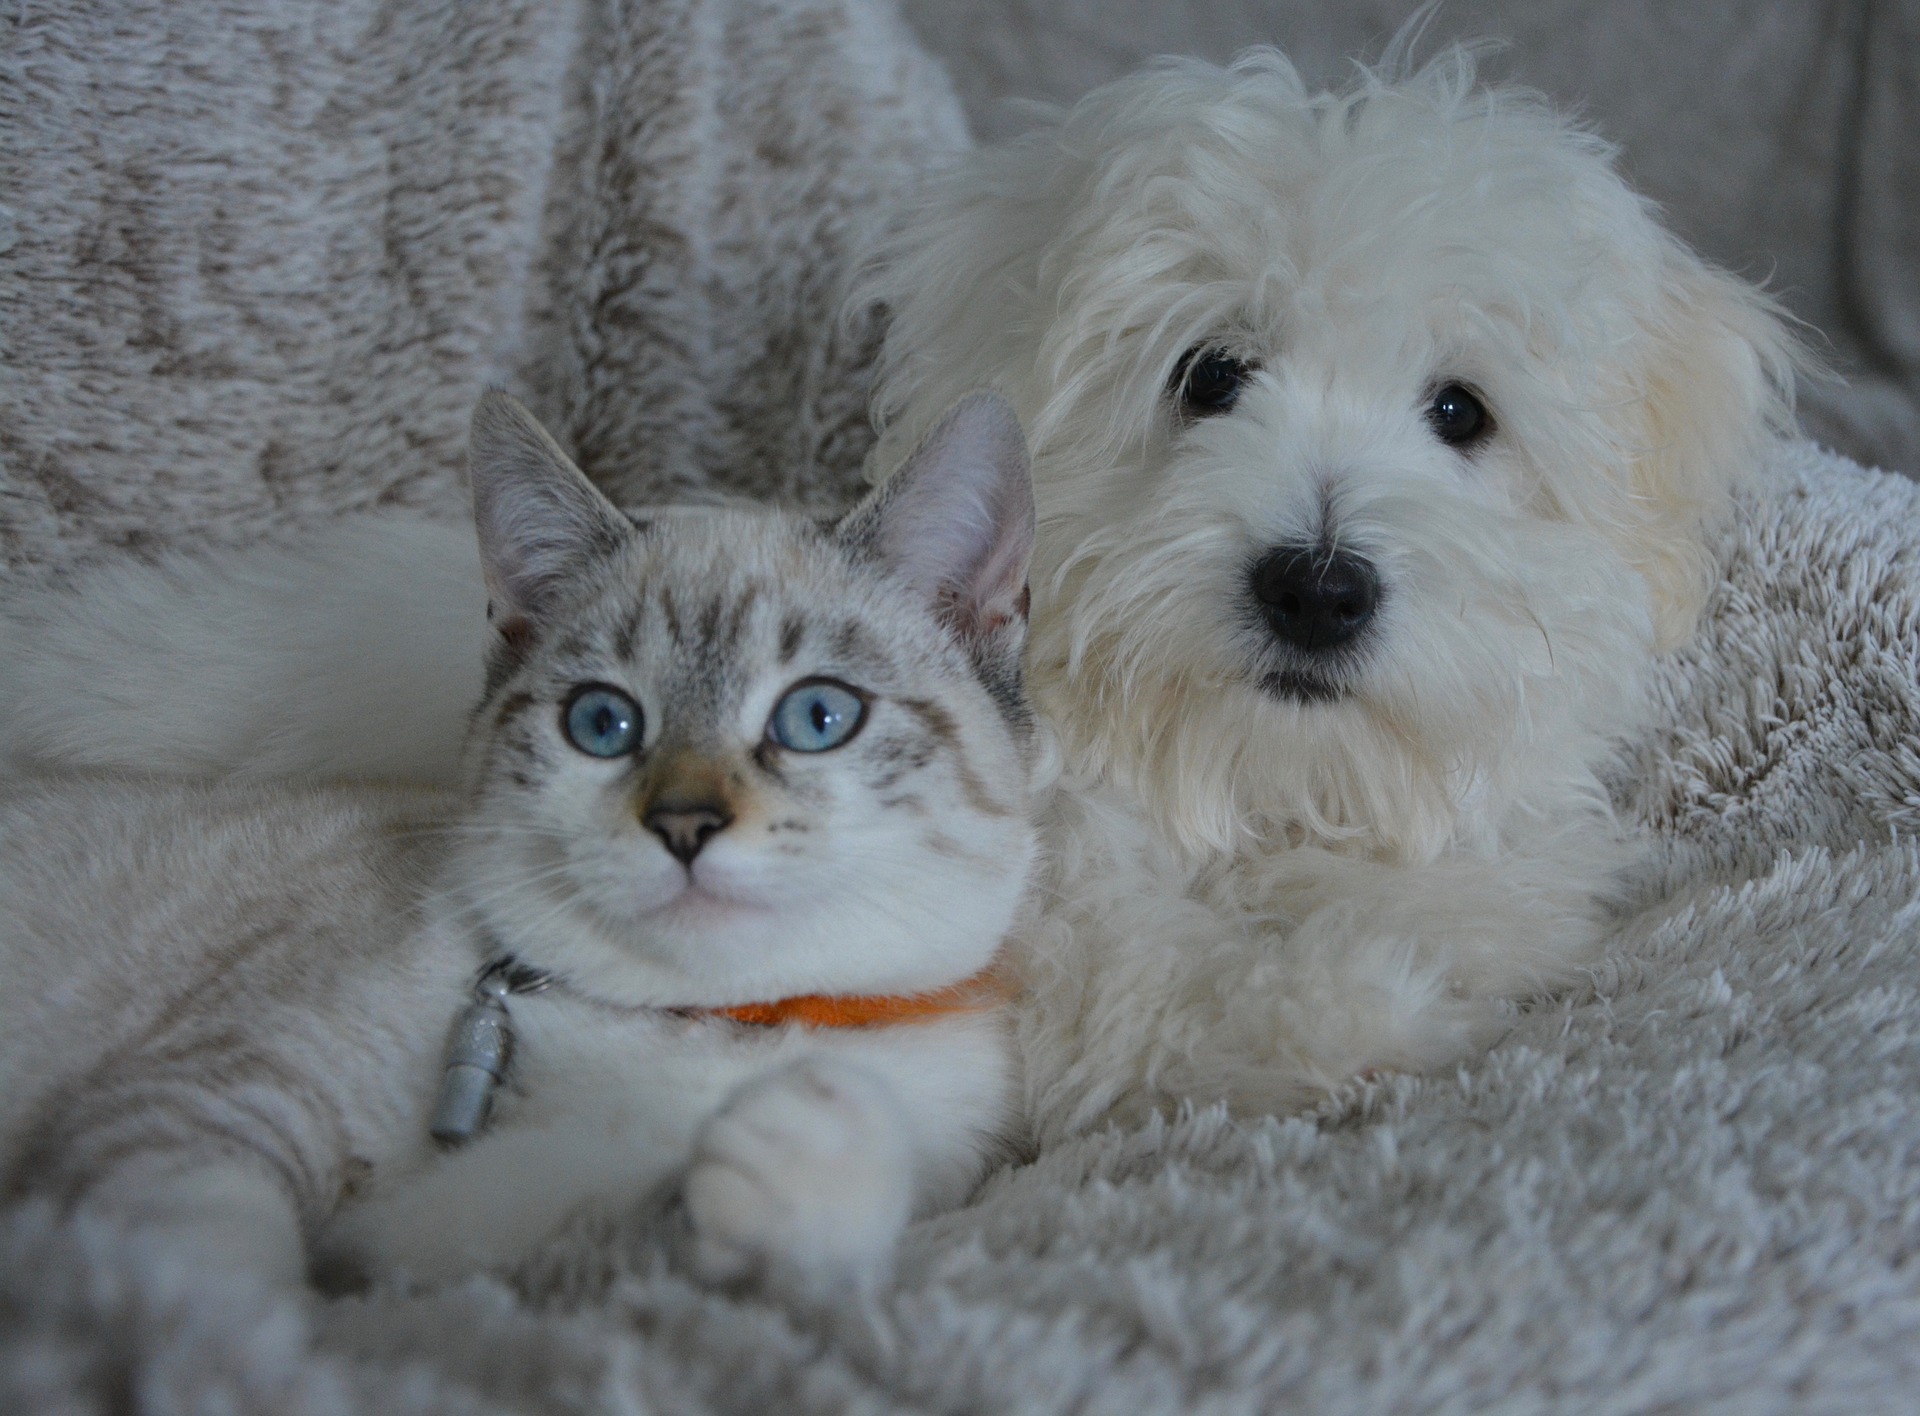 Dog and cat relaxing together